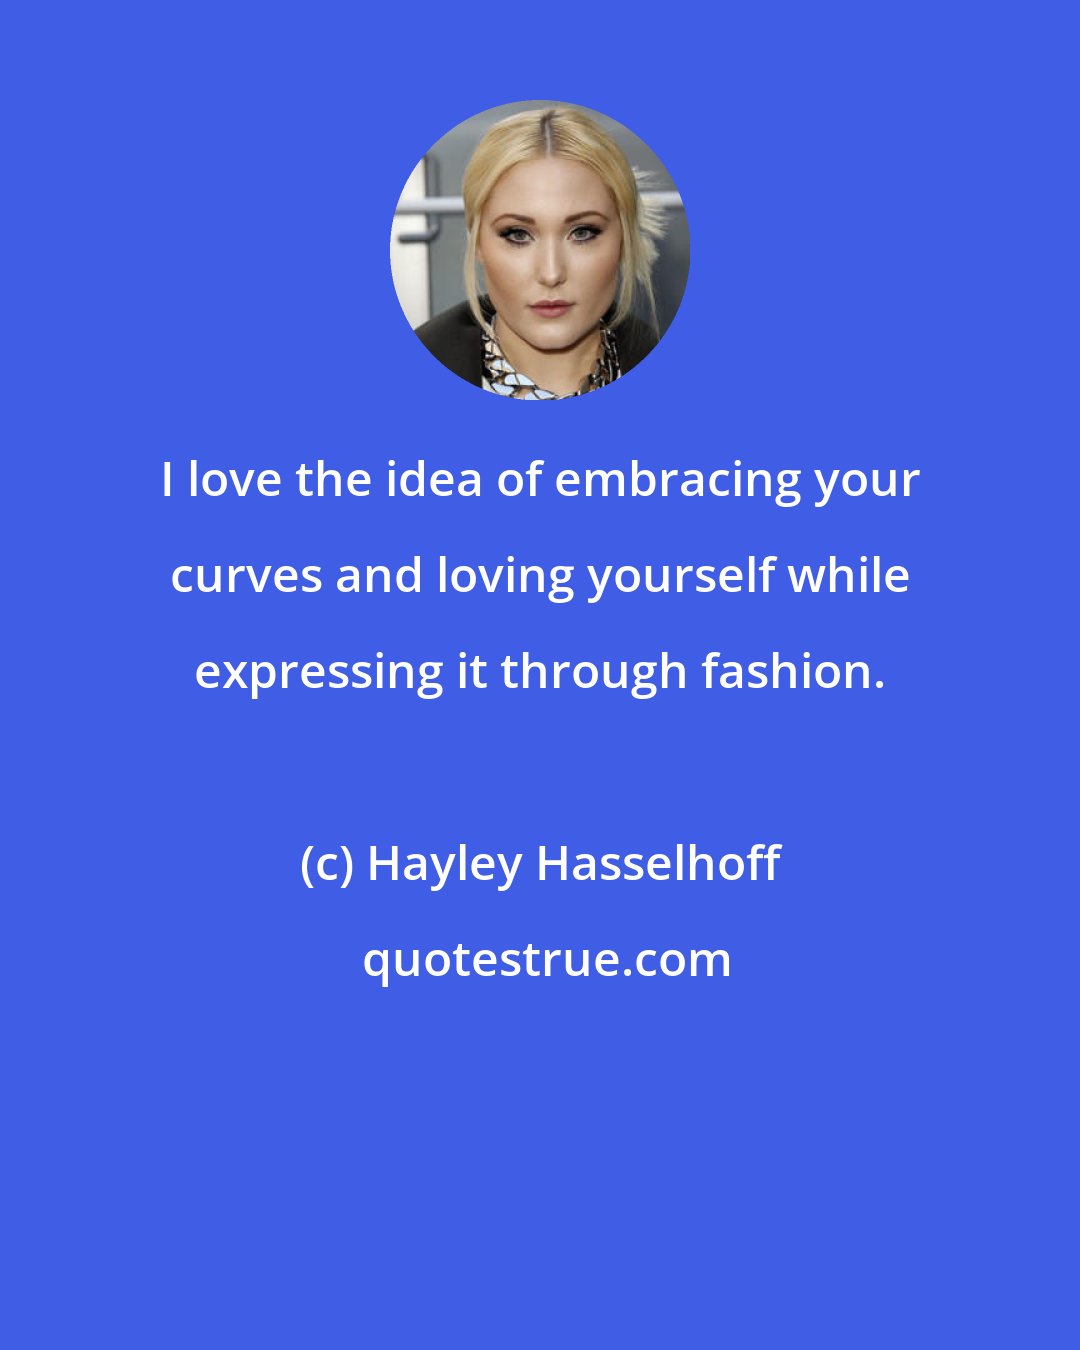 Hayley Hasselhoff: I love the idea of embracing your curves and loving yourself while expressing it through fashion.